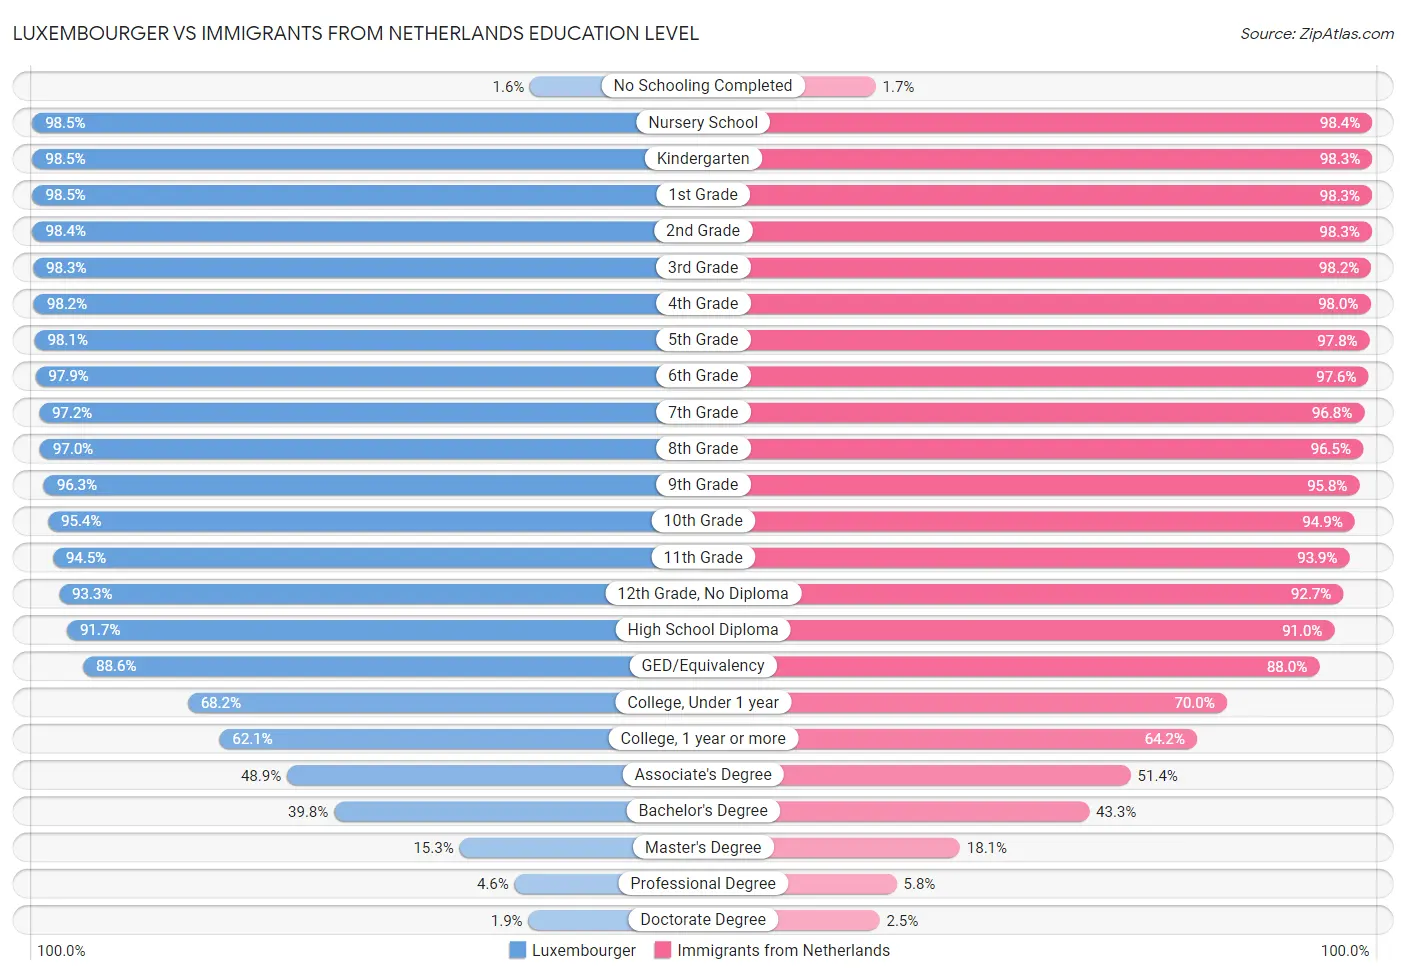 Luxembourger vs Immigrants from Netherlands Education Level